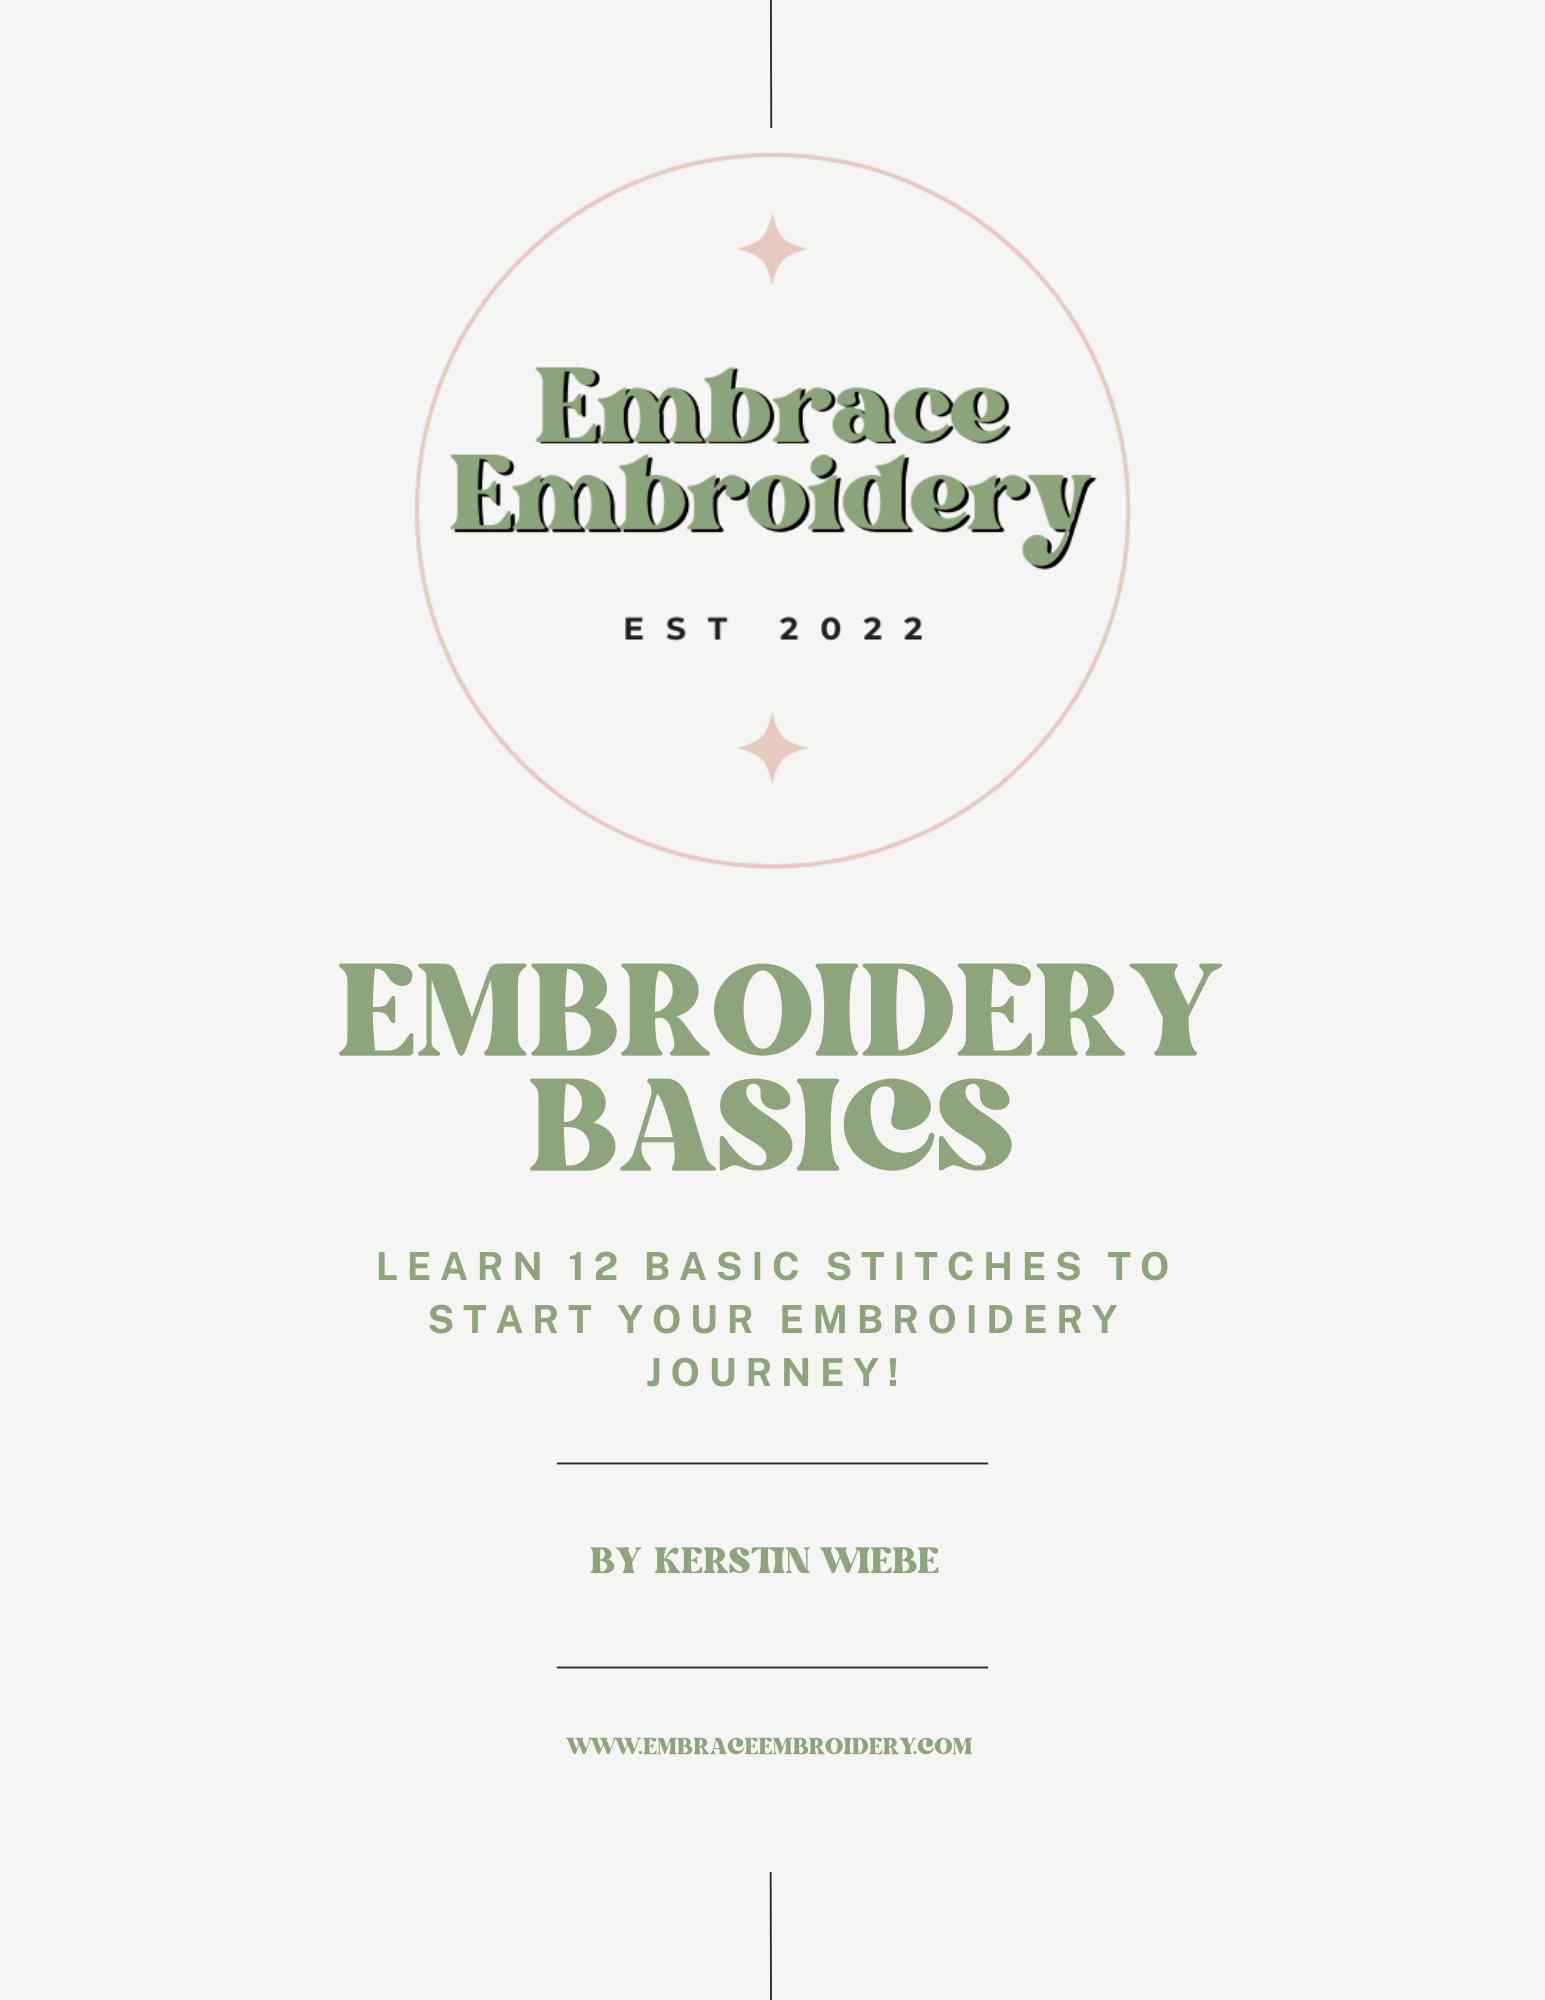 Nearly Free Vintage Embroidery Books (Vol 2), Digital Download, PDF Files,  7 Books for 99 cents. That's less than 15 cents each!